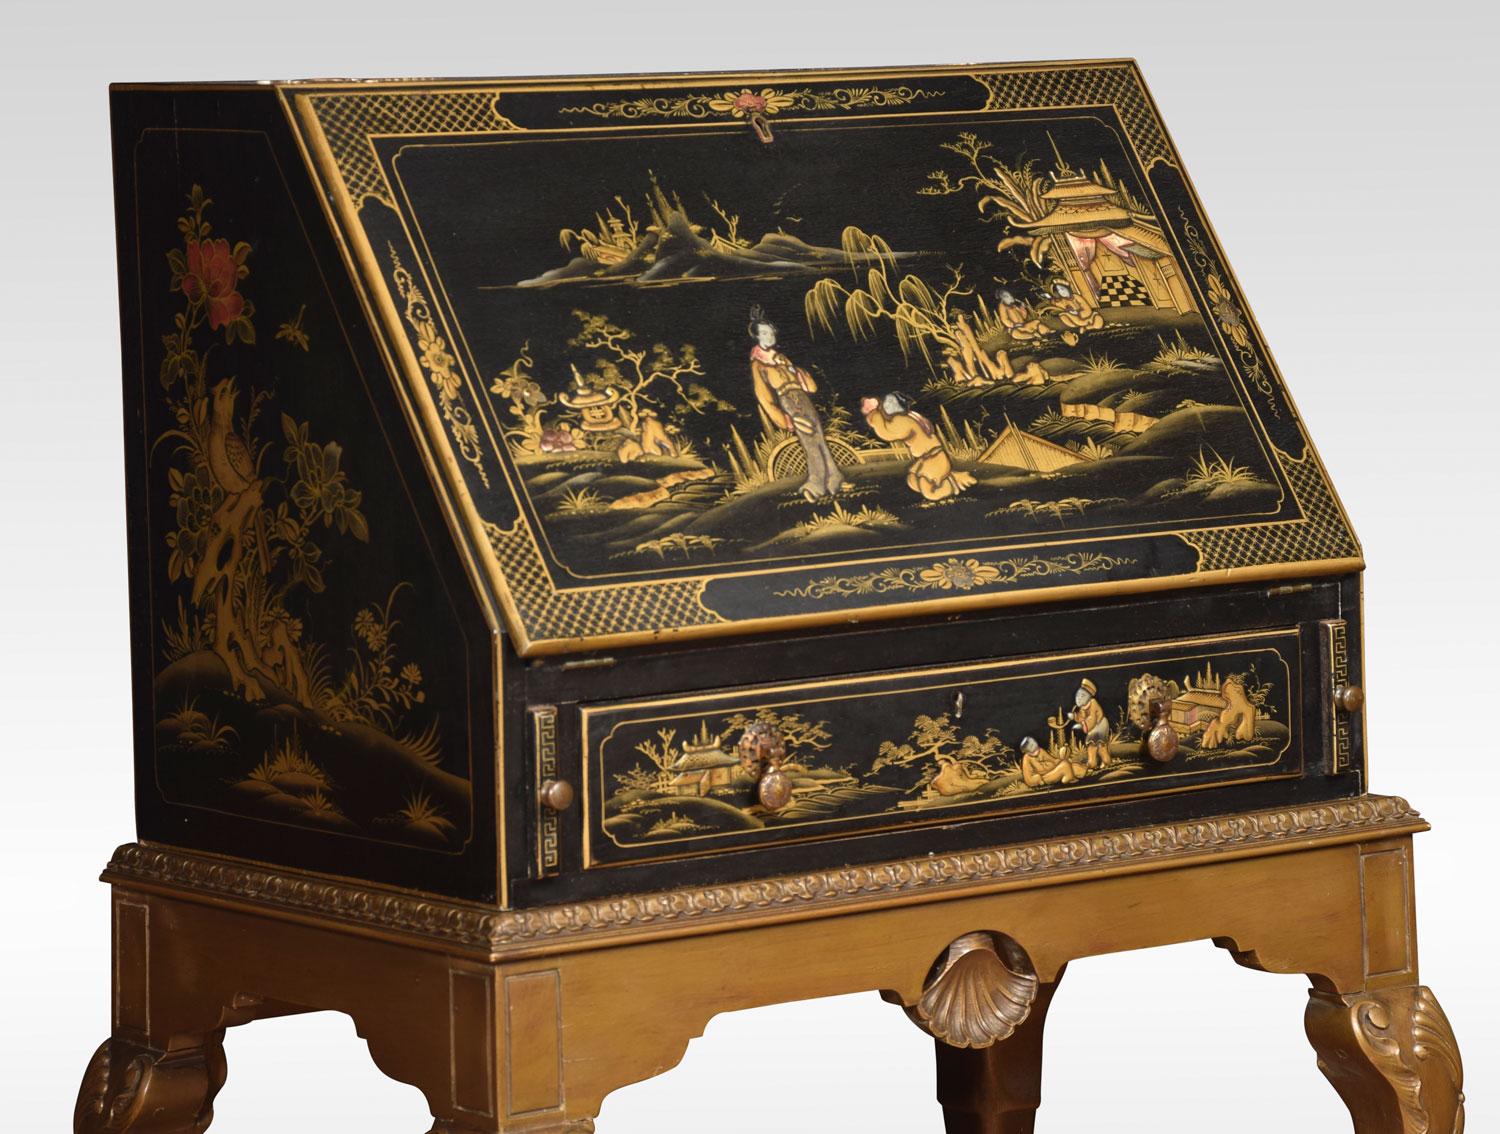 20th Century Black Lacquer Chinoiserie Decorated Bureau on Stand